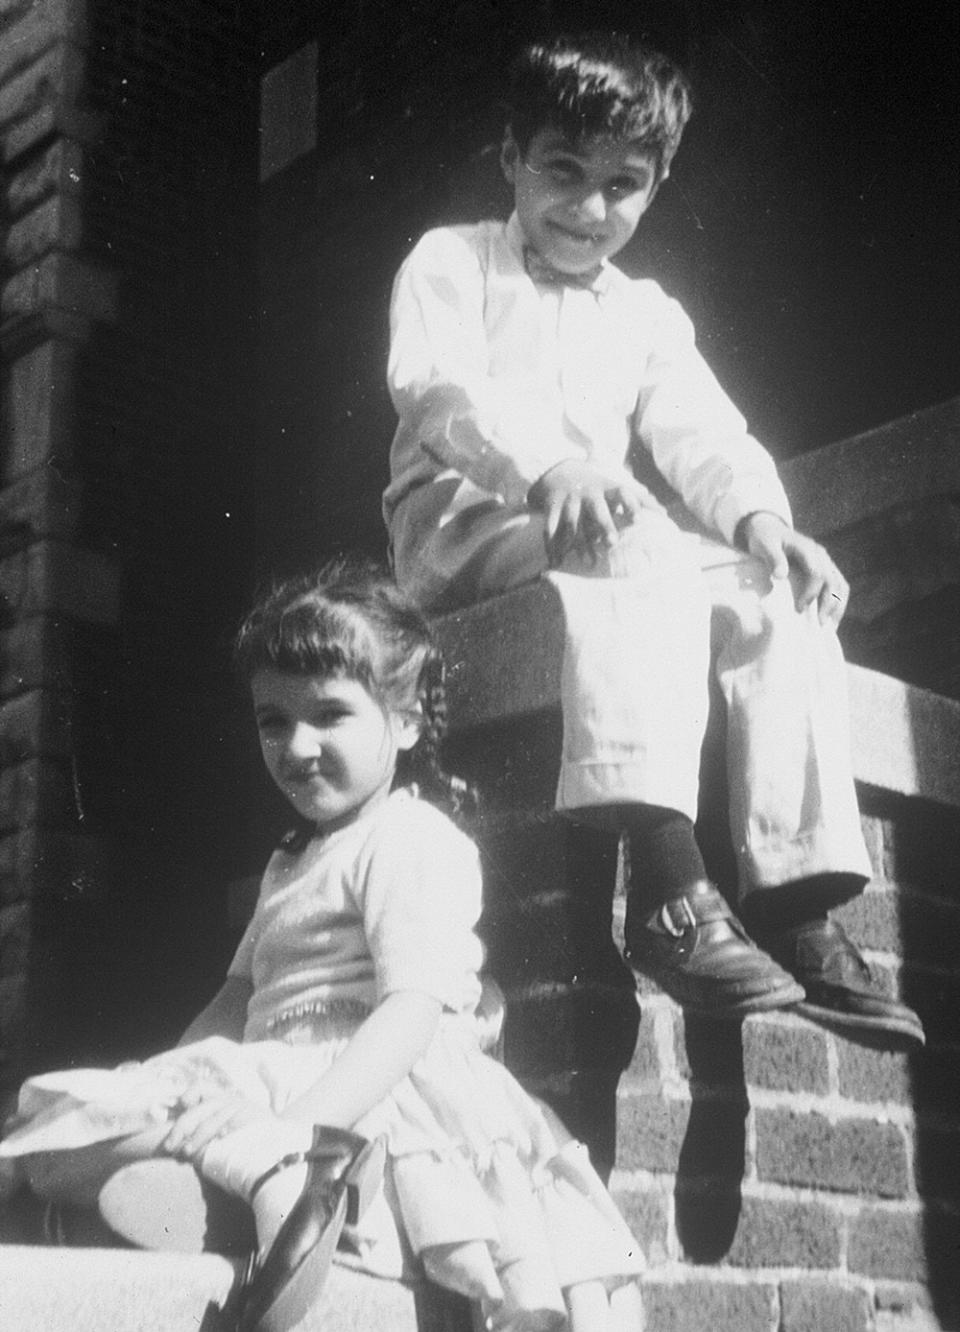 Sandra Cisneros and her brother sitting on the steps outside her grandfather’s house.